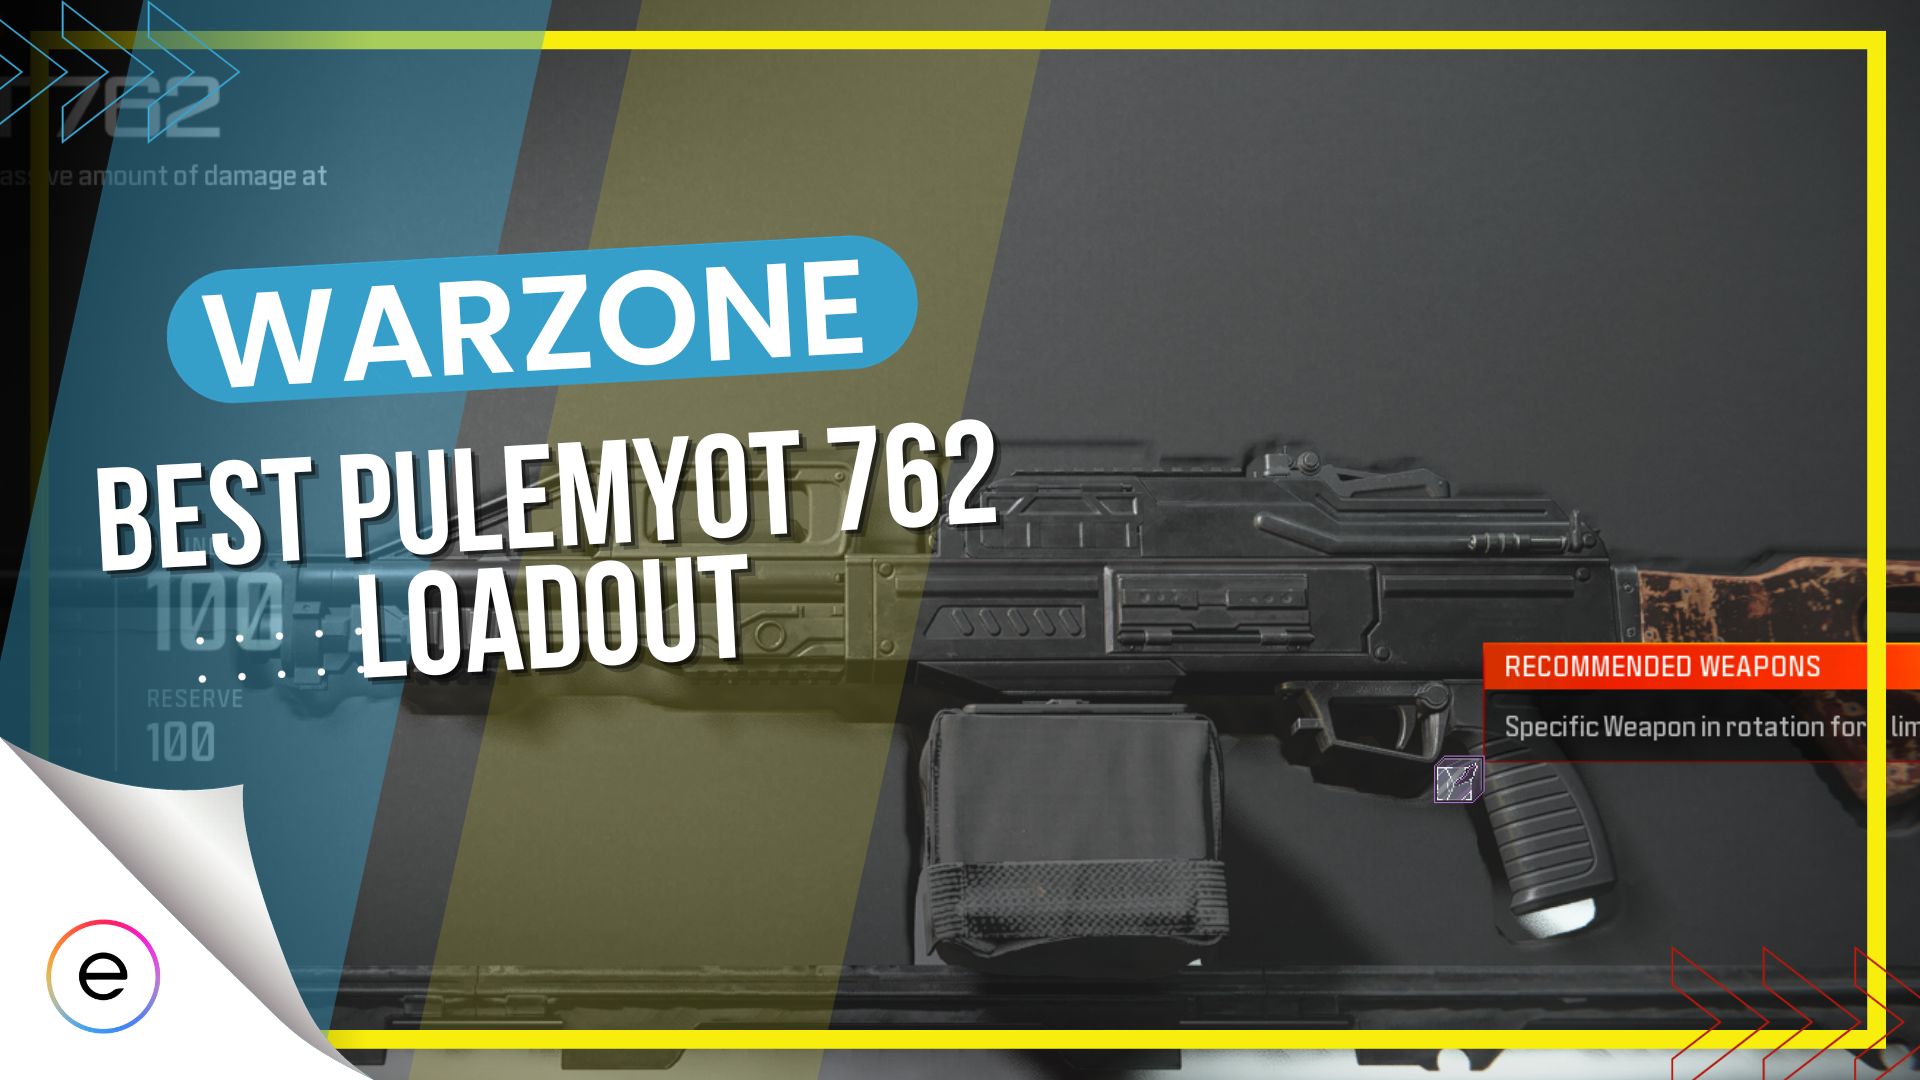 Best loadout of Pulemyot 762 in warzone.